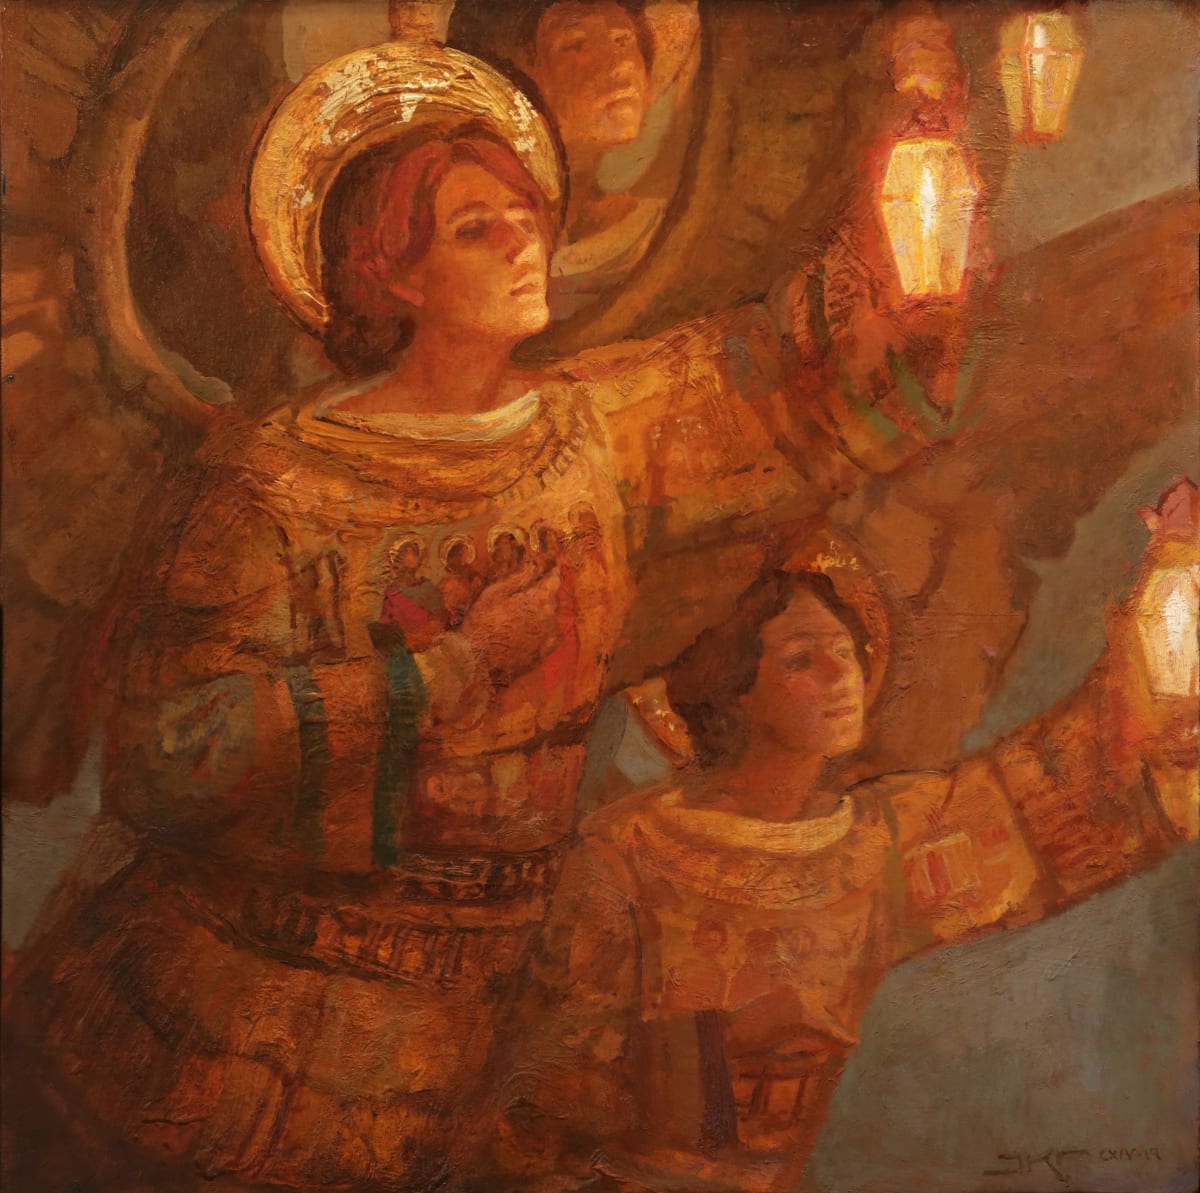 Bringers of Light by J. Kirk Richards  Image: Angels flying with lanterns. 